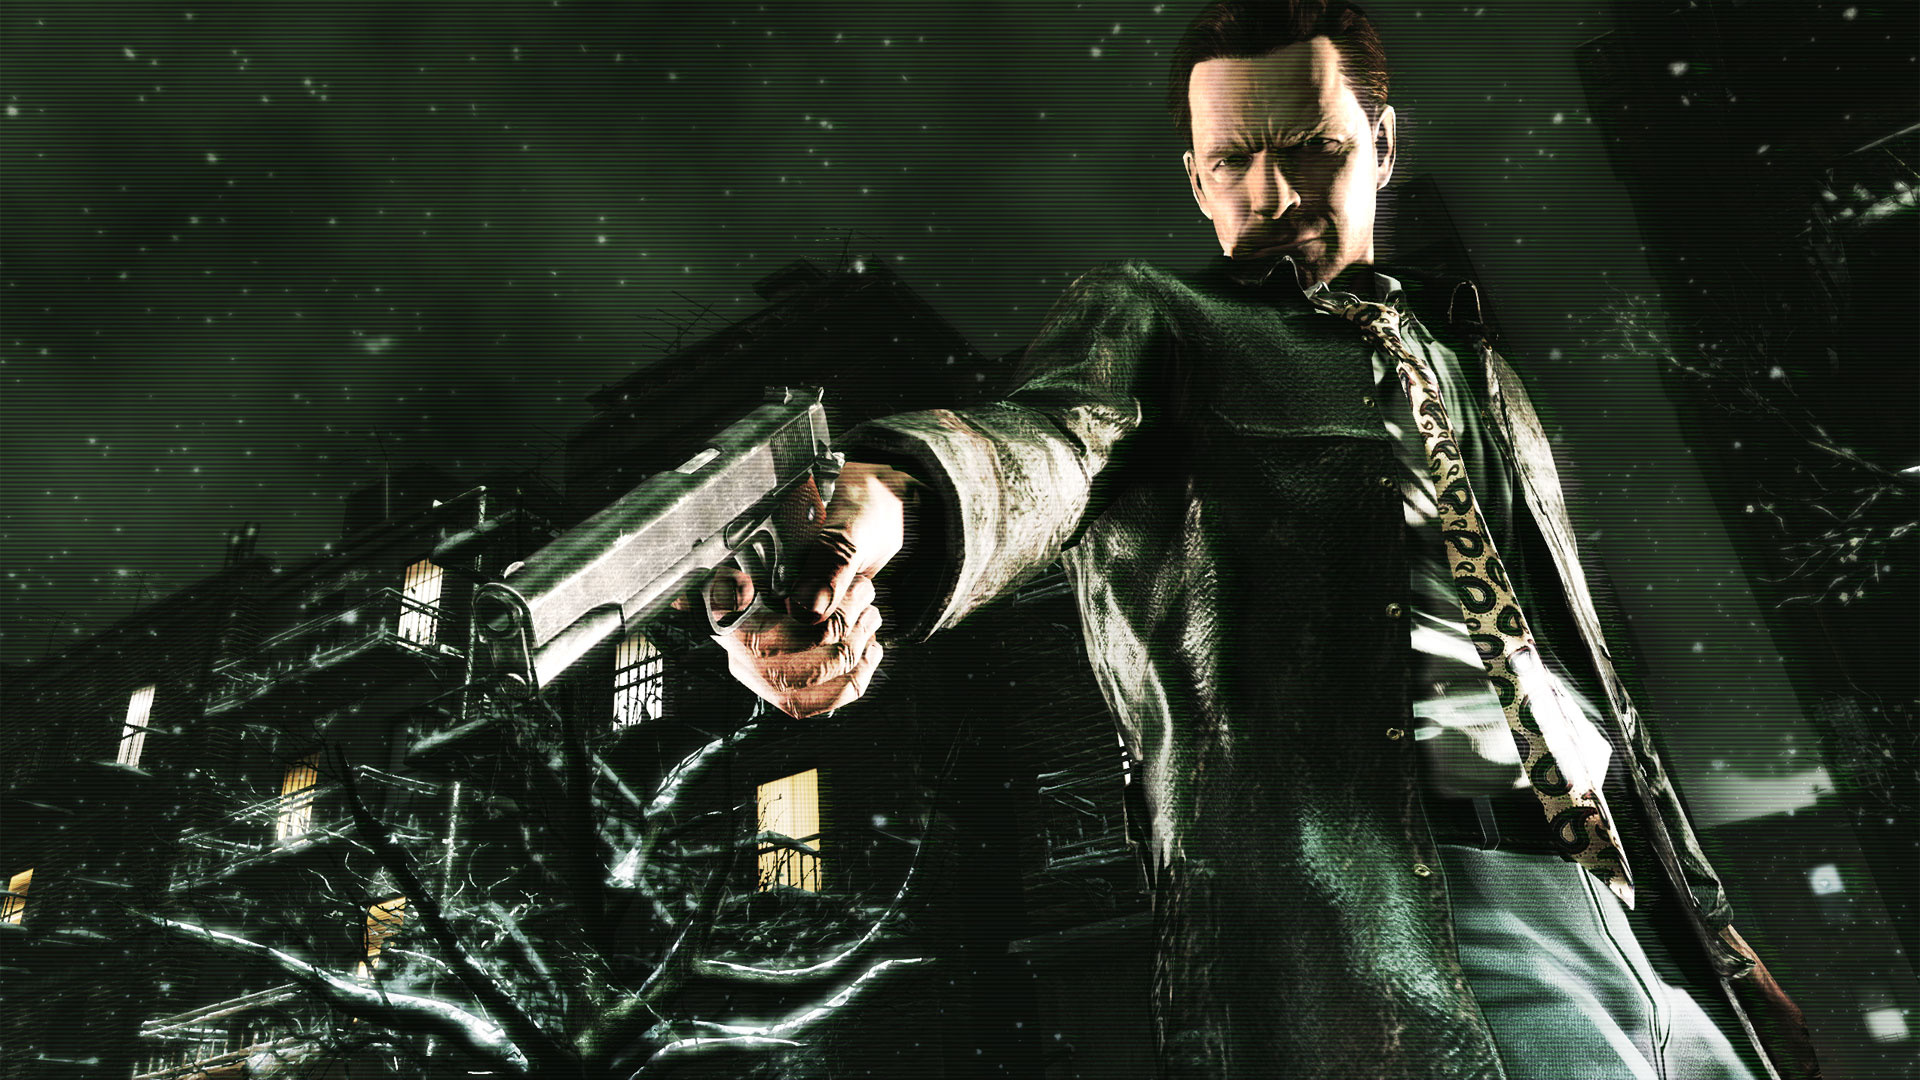 Finally, someone has fixed Max Payne 3 for me by modding in Max's true,  original face